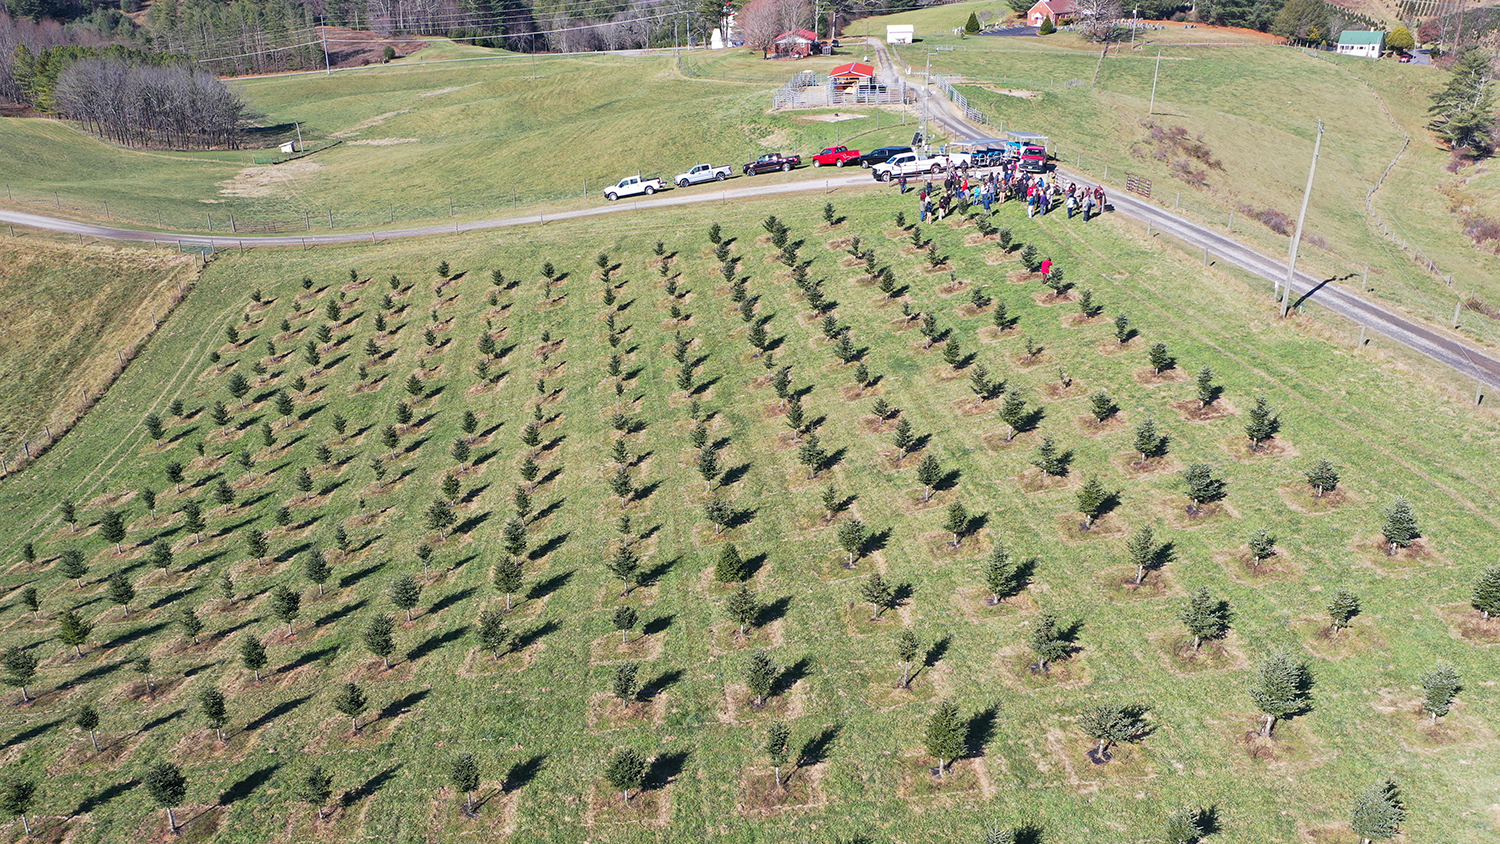 An aerial view of the Fraser fir seed orchard at the Upper Mountain Research Station in Ashe County, North Carolina. Photo courtesy of the North Carolina Department of Agriculture and Consumer Services.